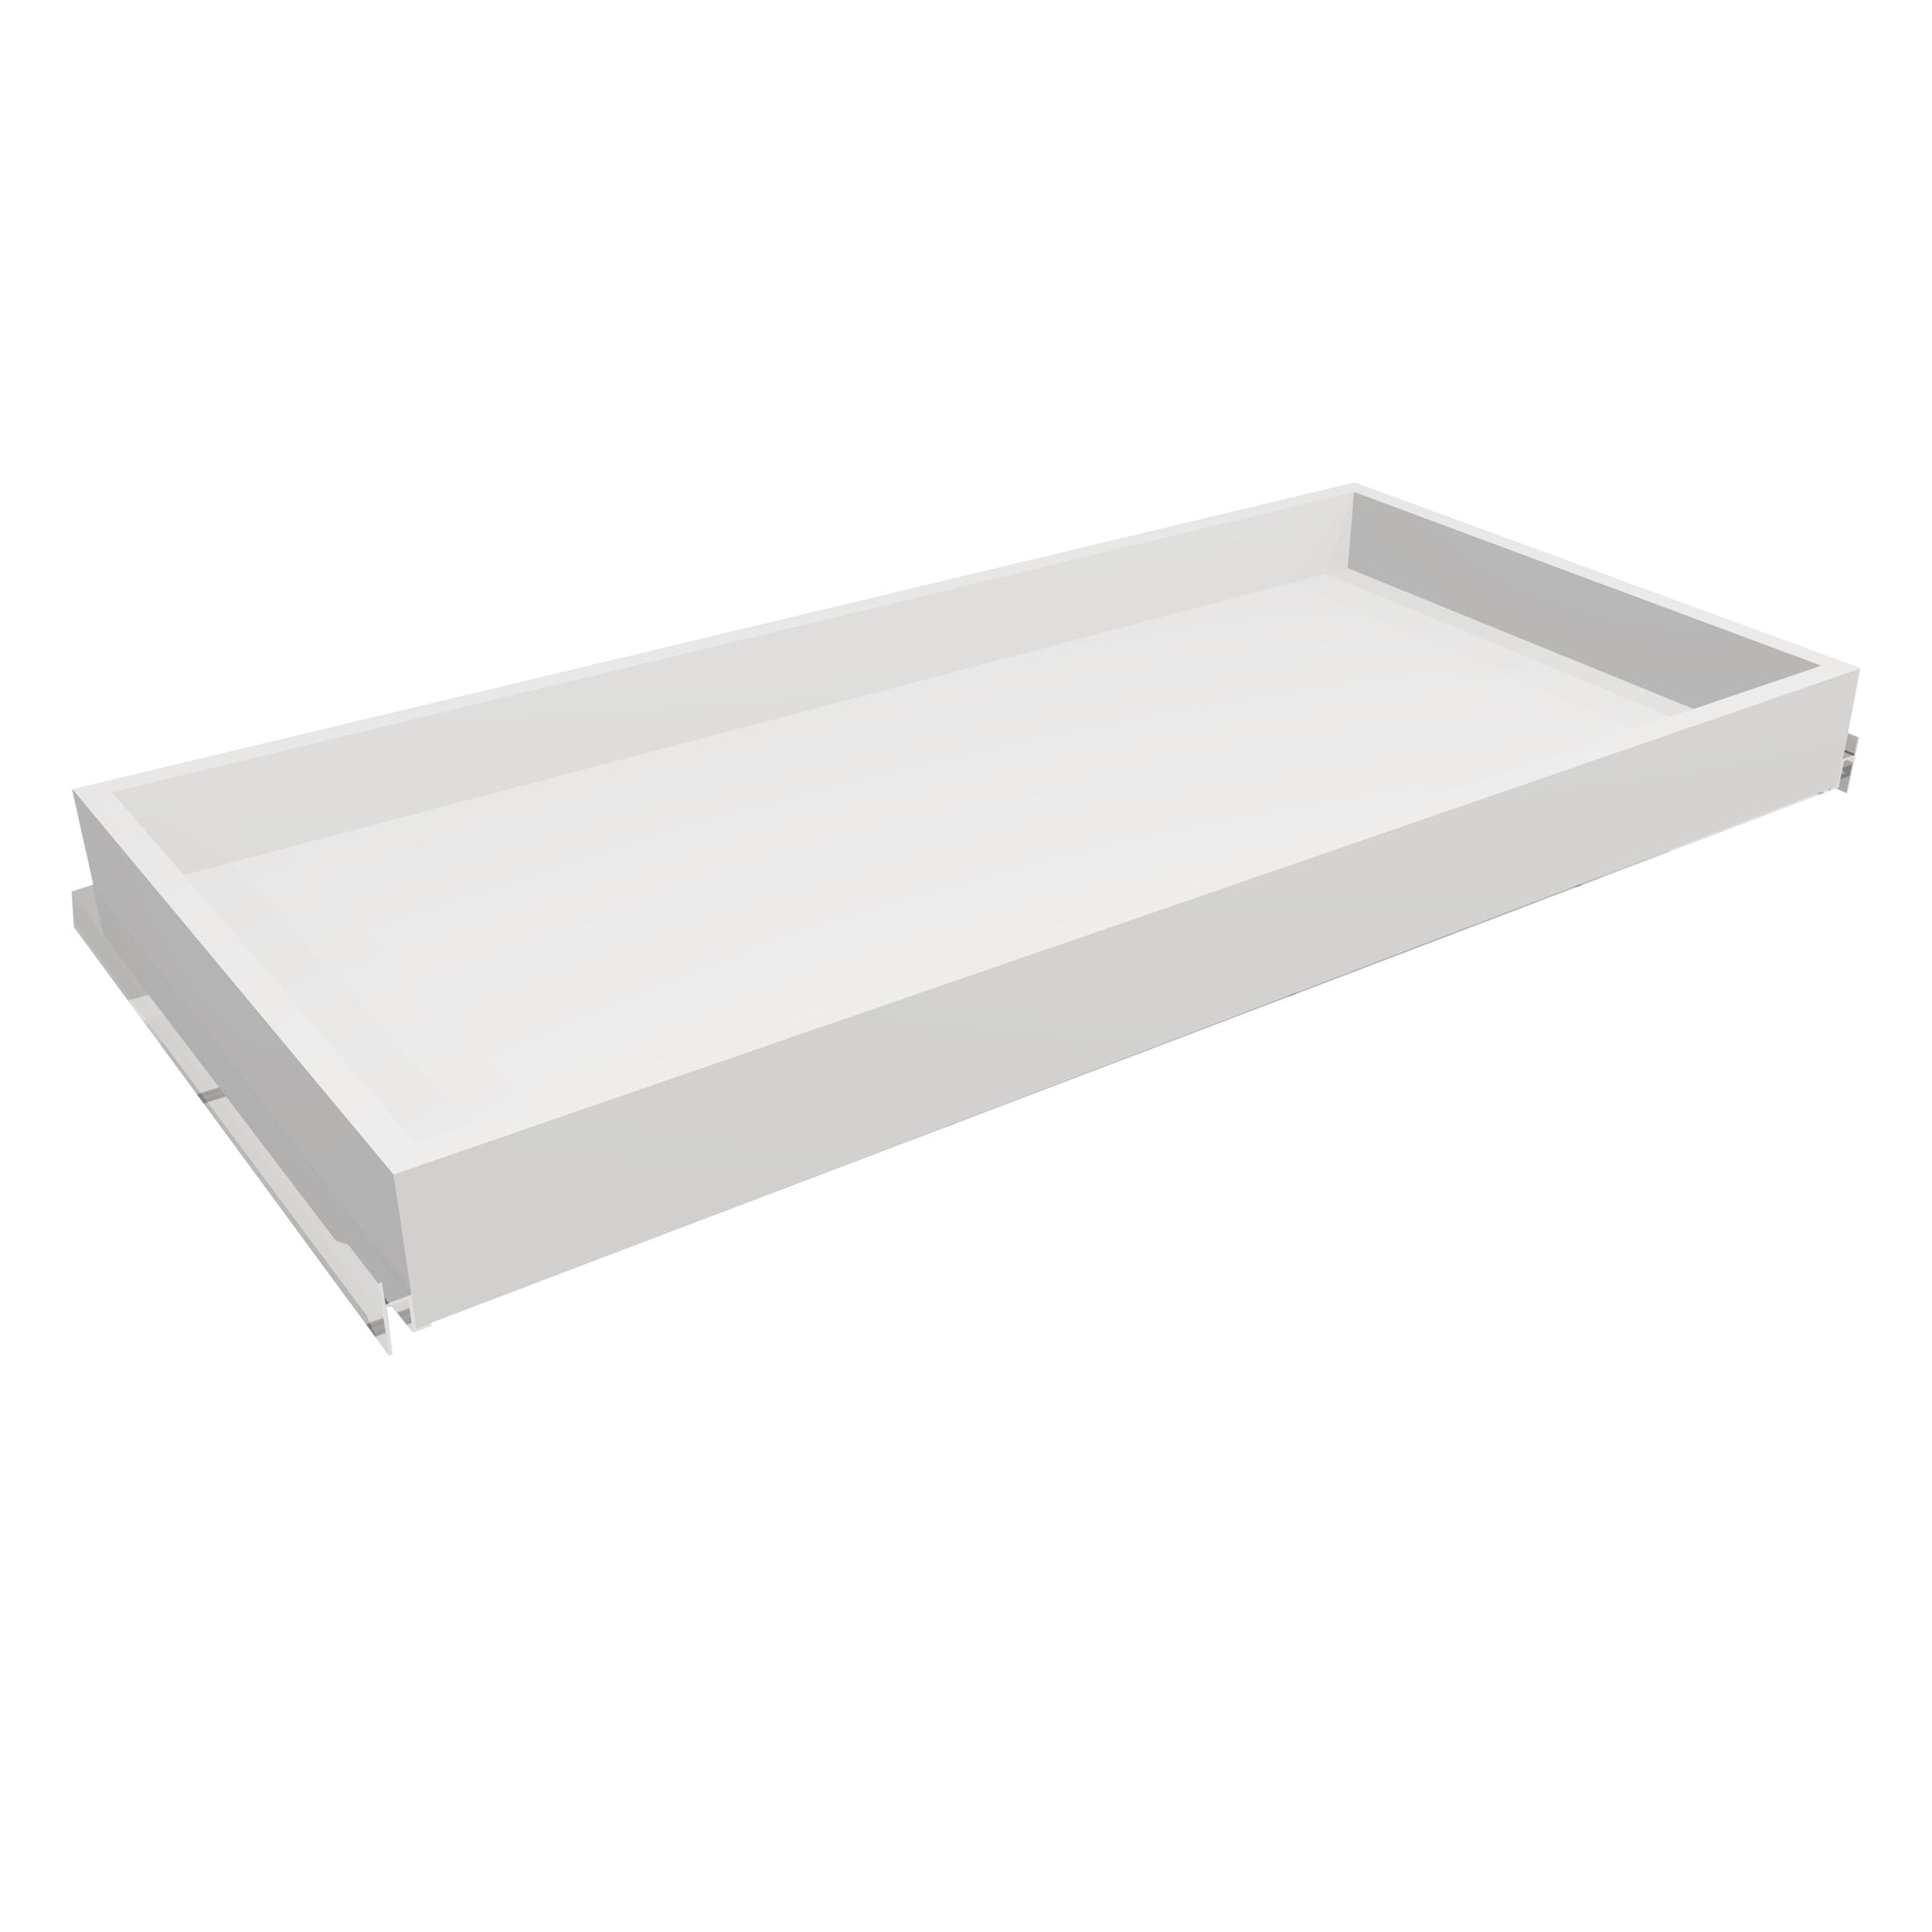 RTA - Lacquer White - Roll Out Tray | 33"W